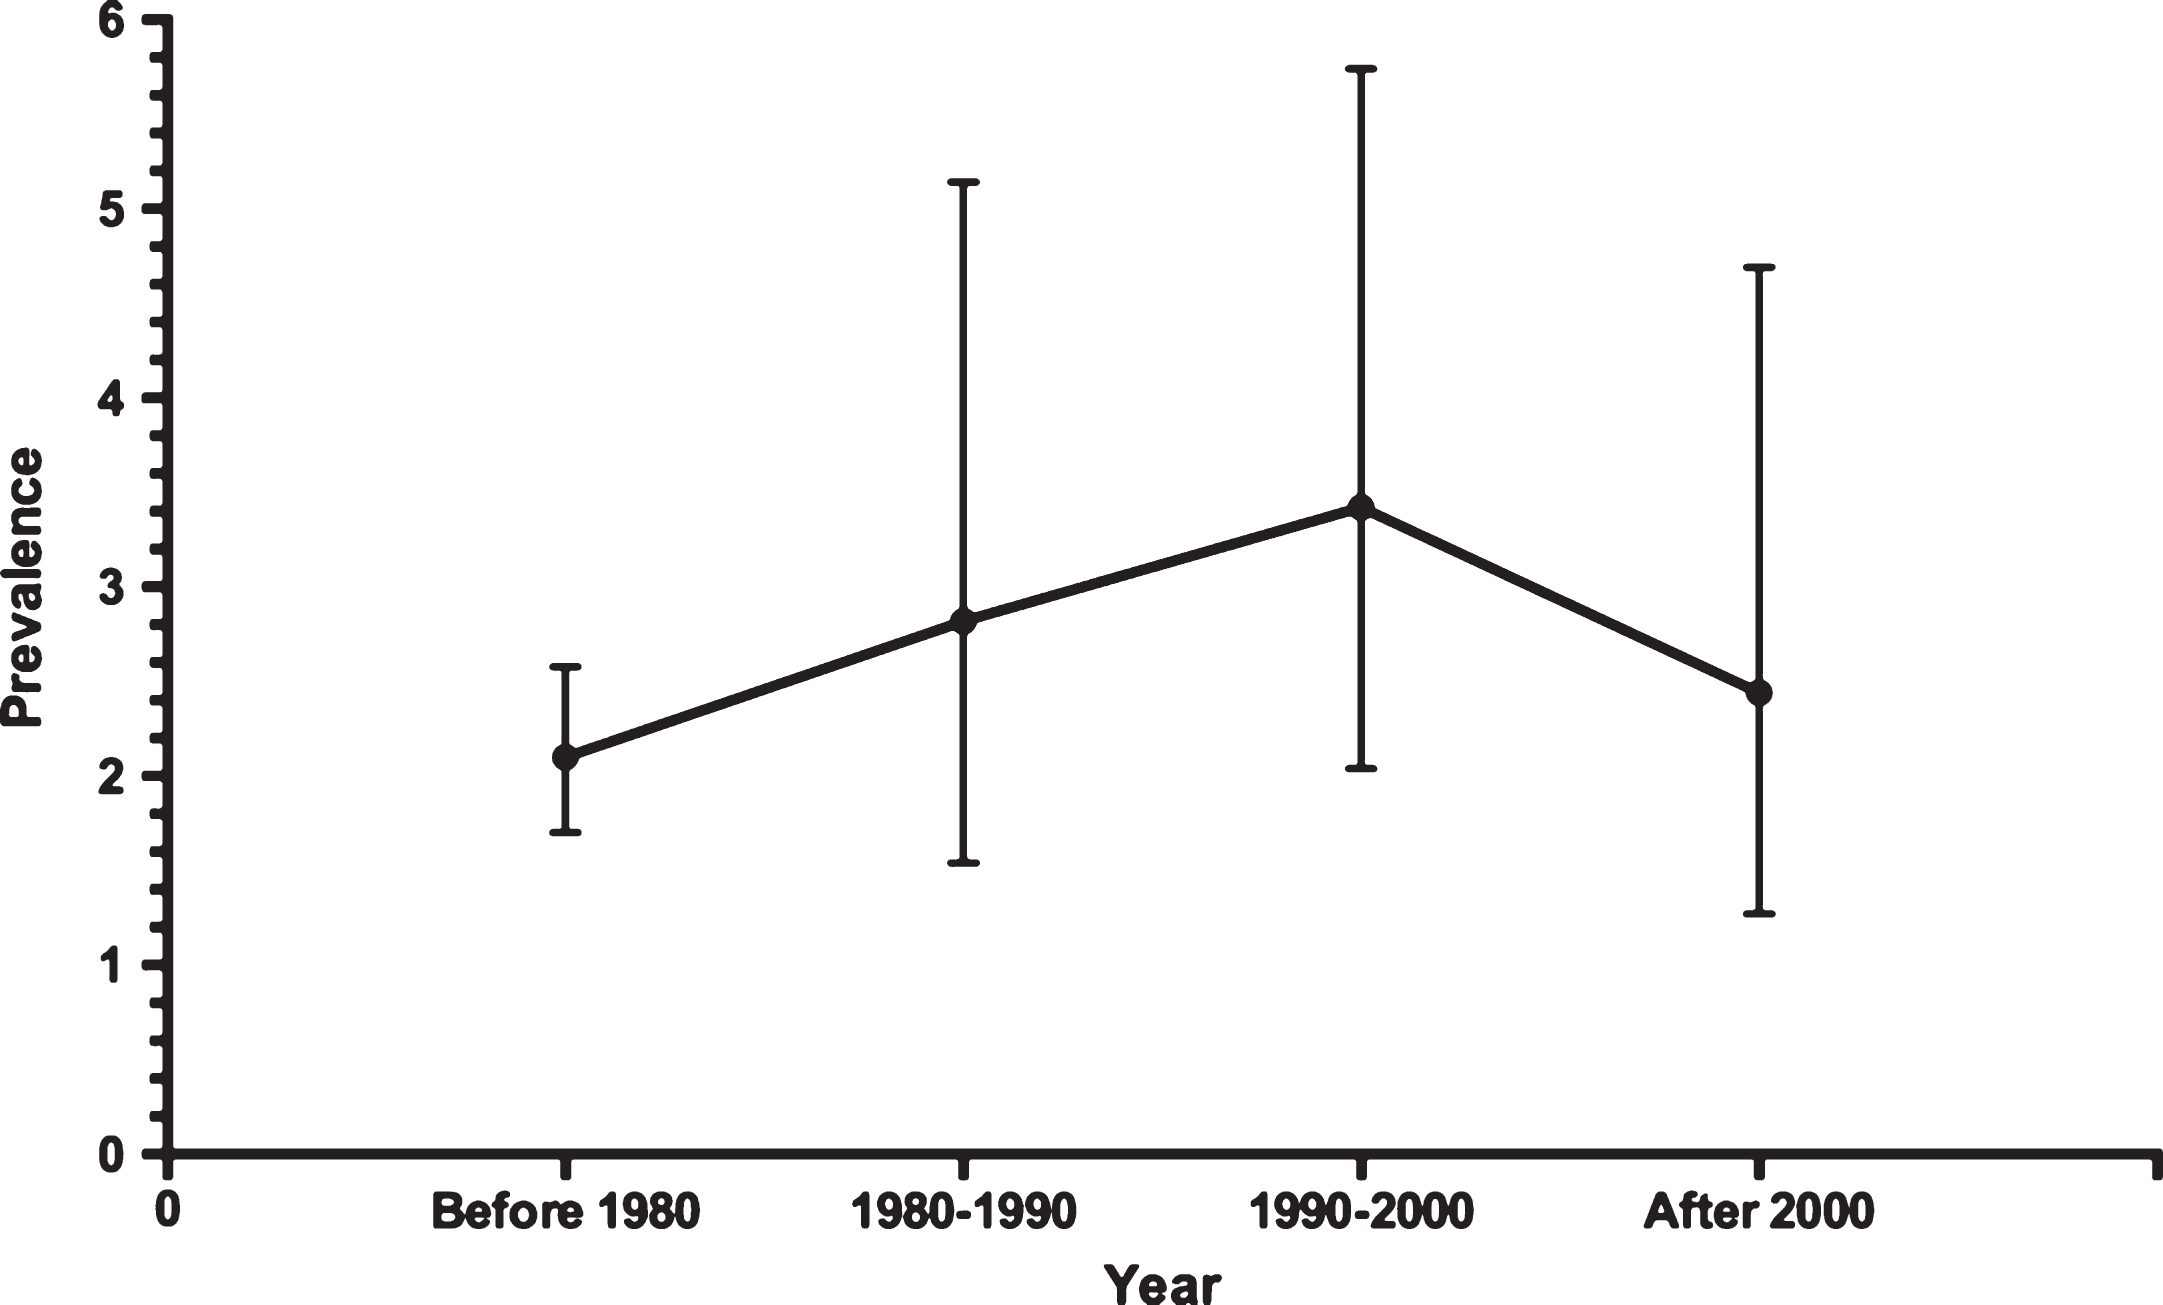 The prevalence of PVS and its trend over the past four decades.